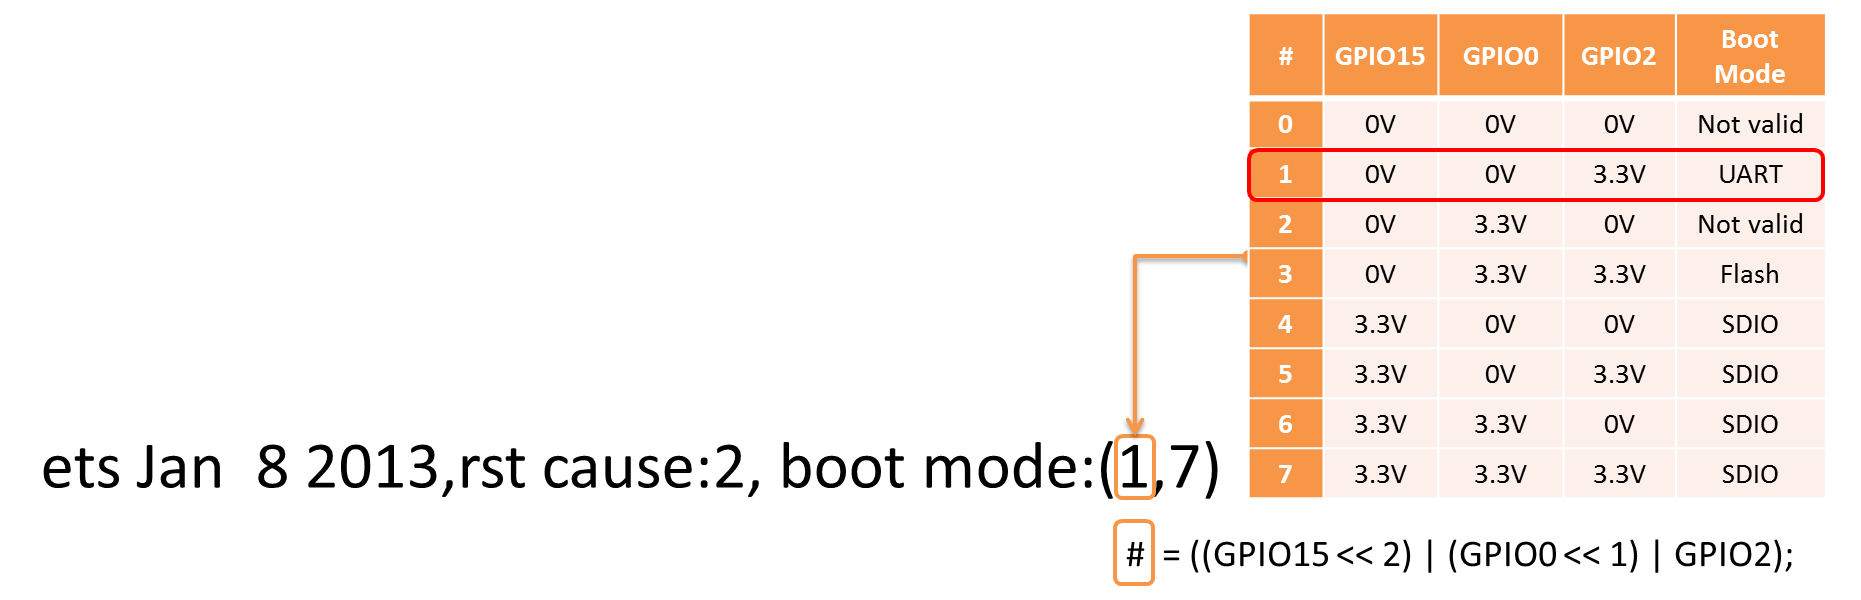 Decoding of boot mode